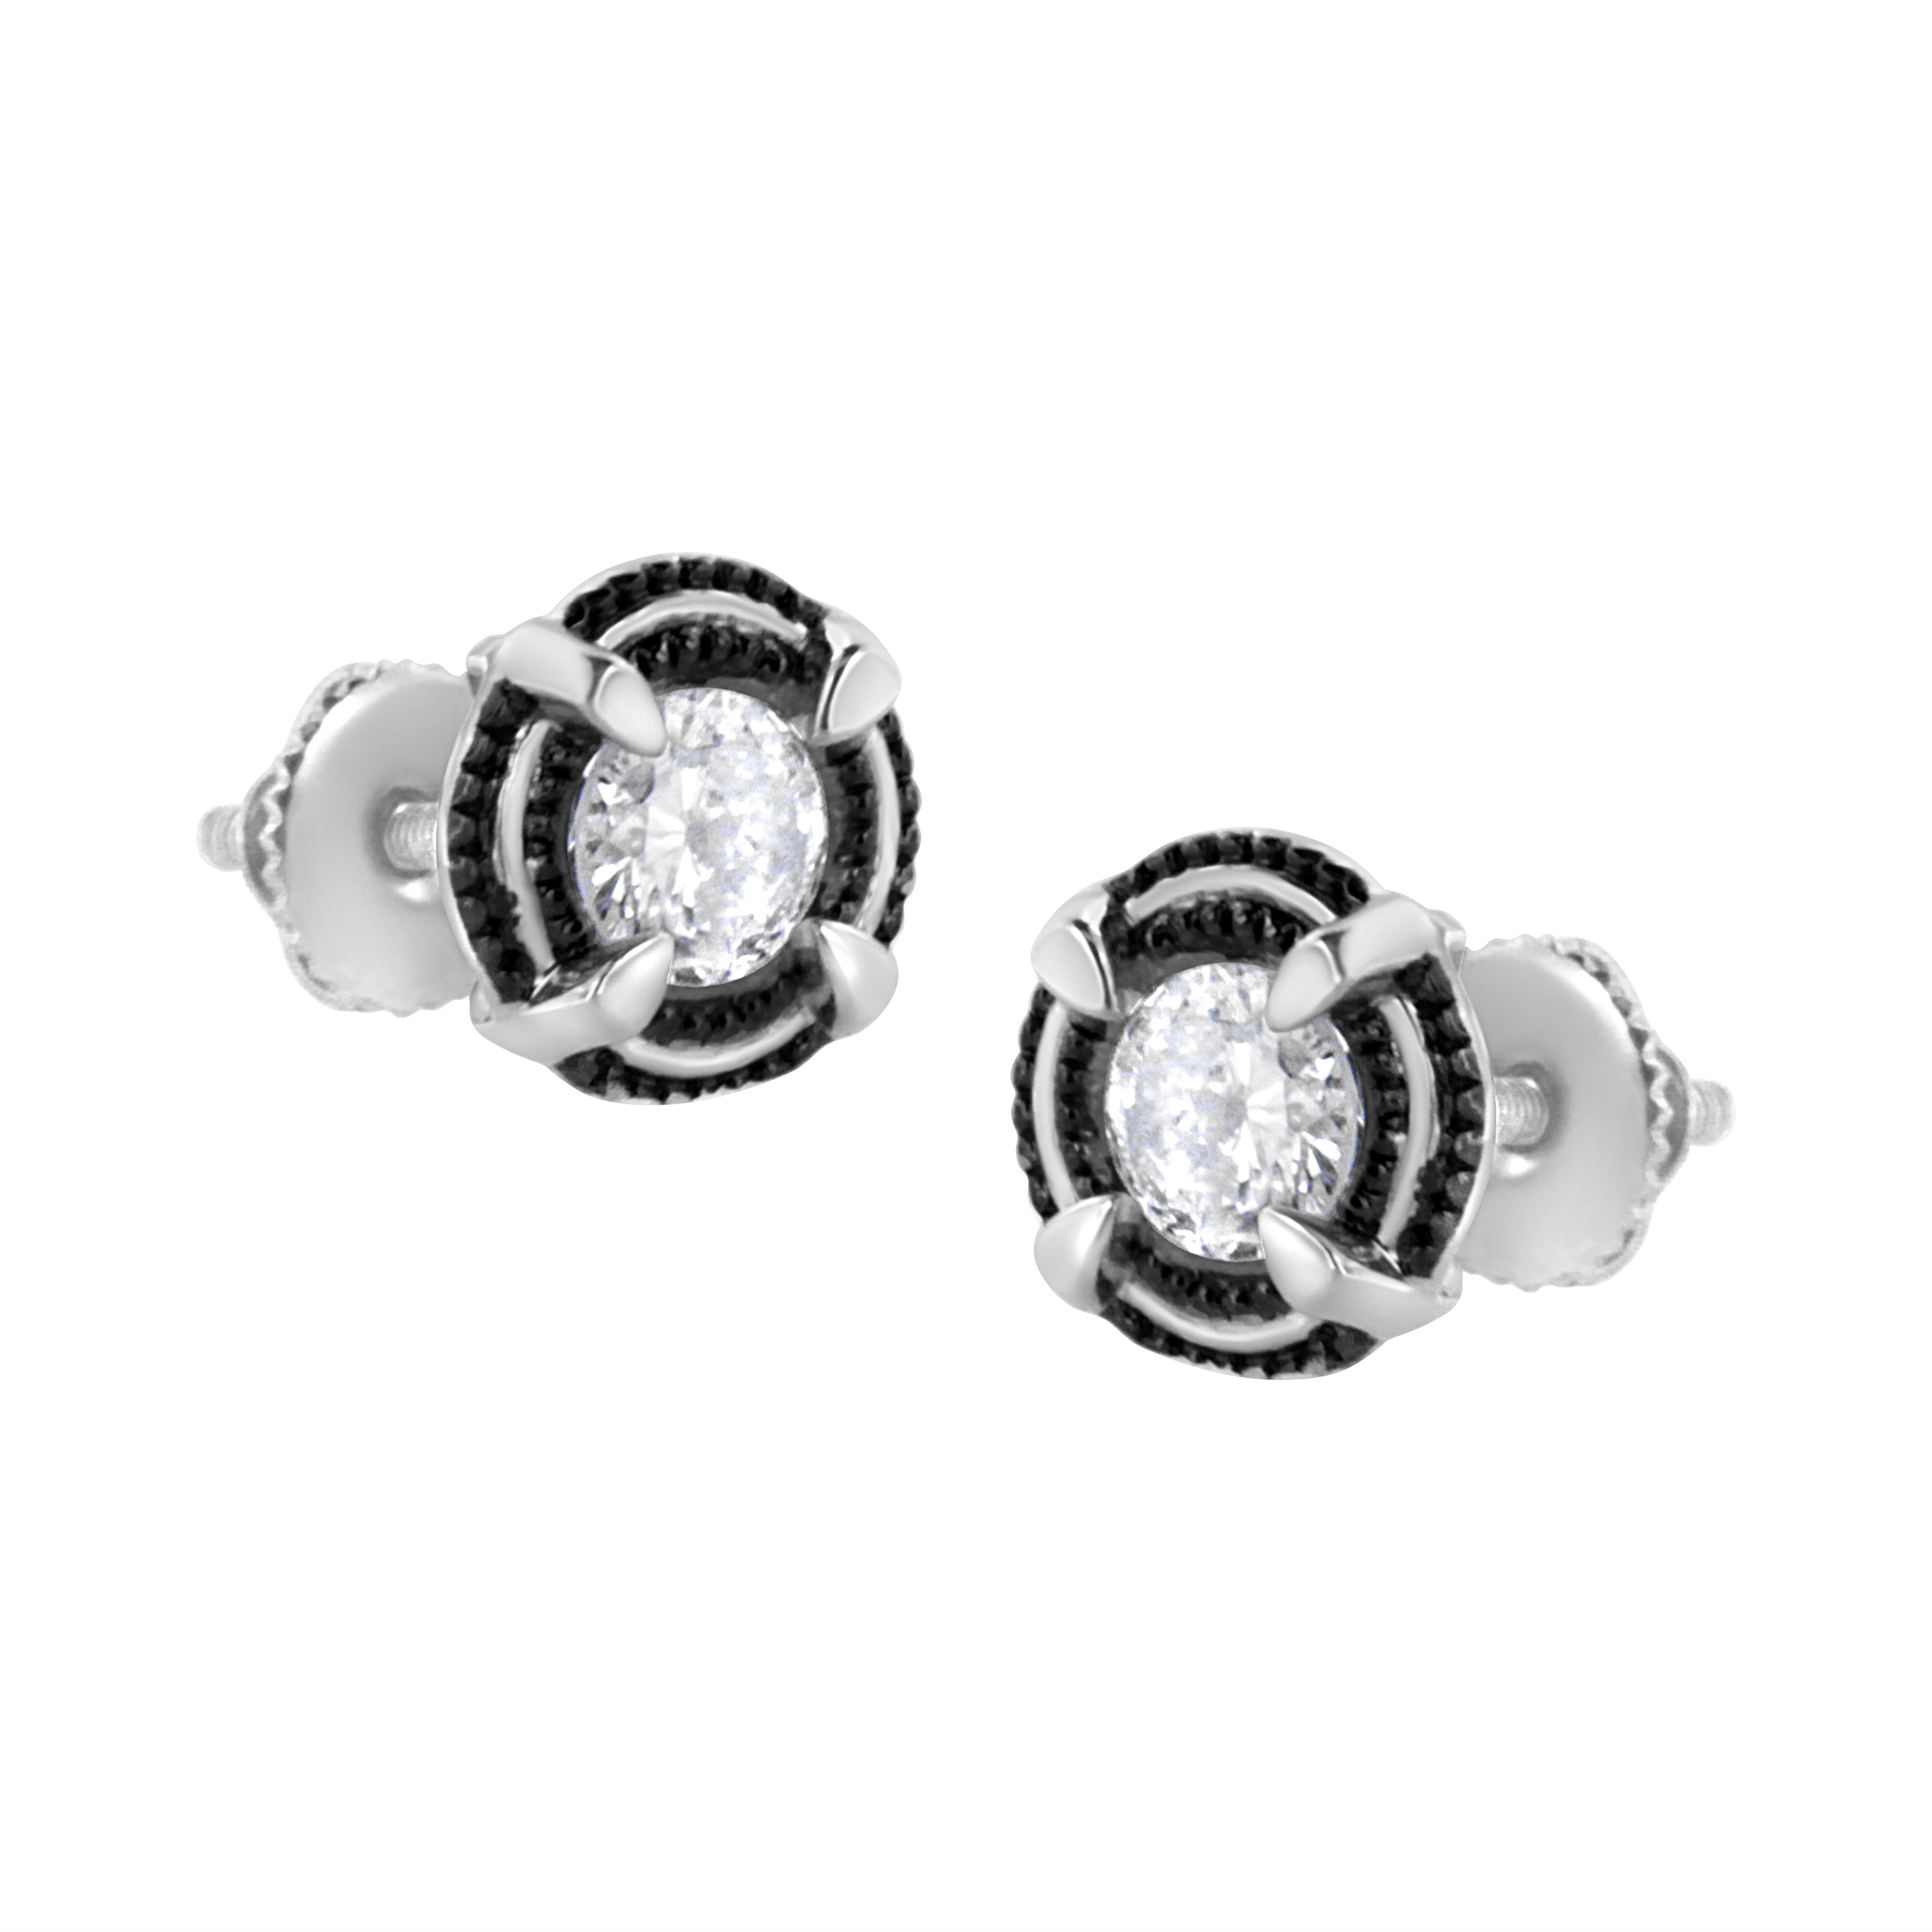 A modern classic, these gorgeous 92.5% sterling silver stud earrings feature round brilliant shape diamonds in a 1 1/2 Carat diamond total weight. These sparkling solitaire style diamonds are placed in the center of a raised double ring of milgrain